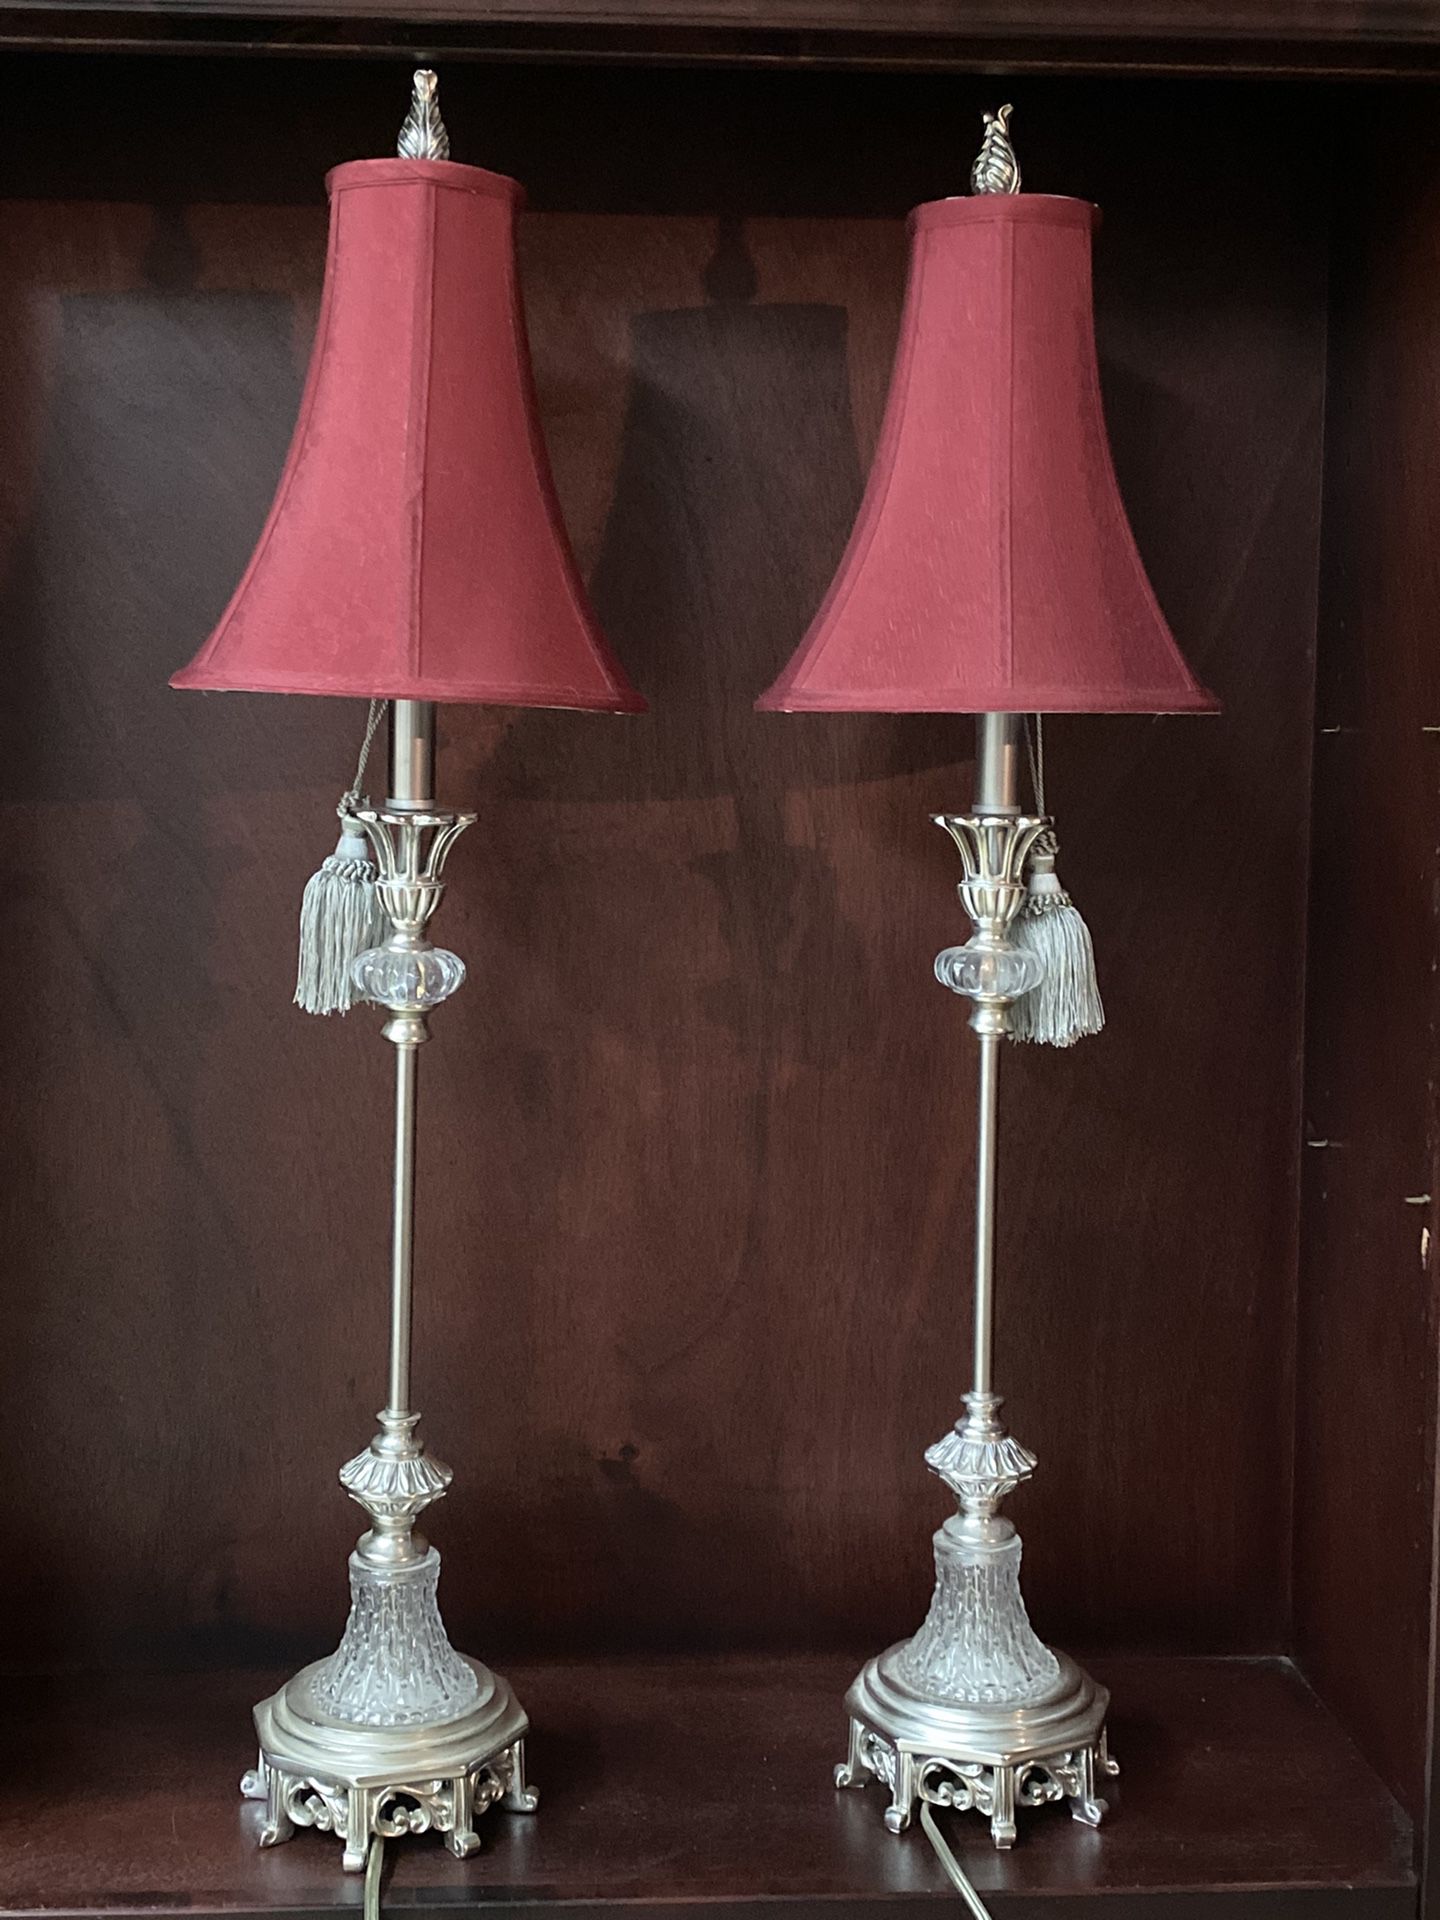 Set of sofa table lamps with maroon shades.